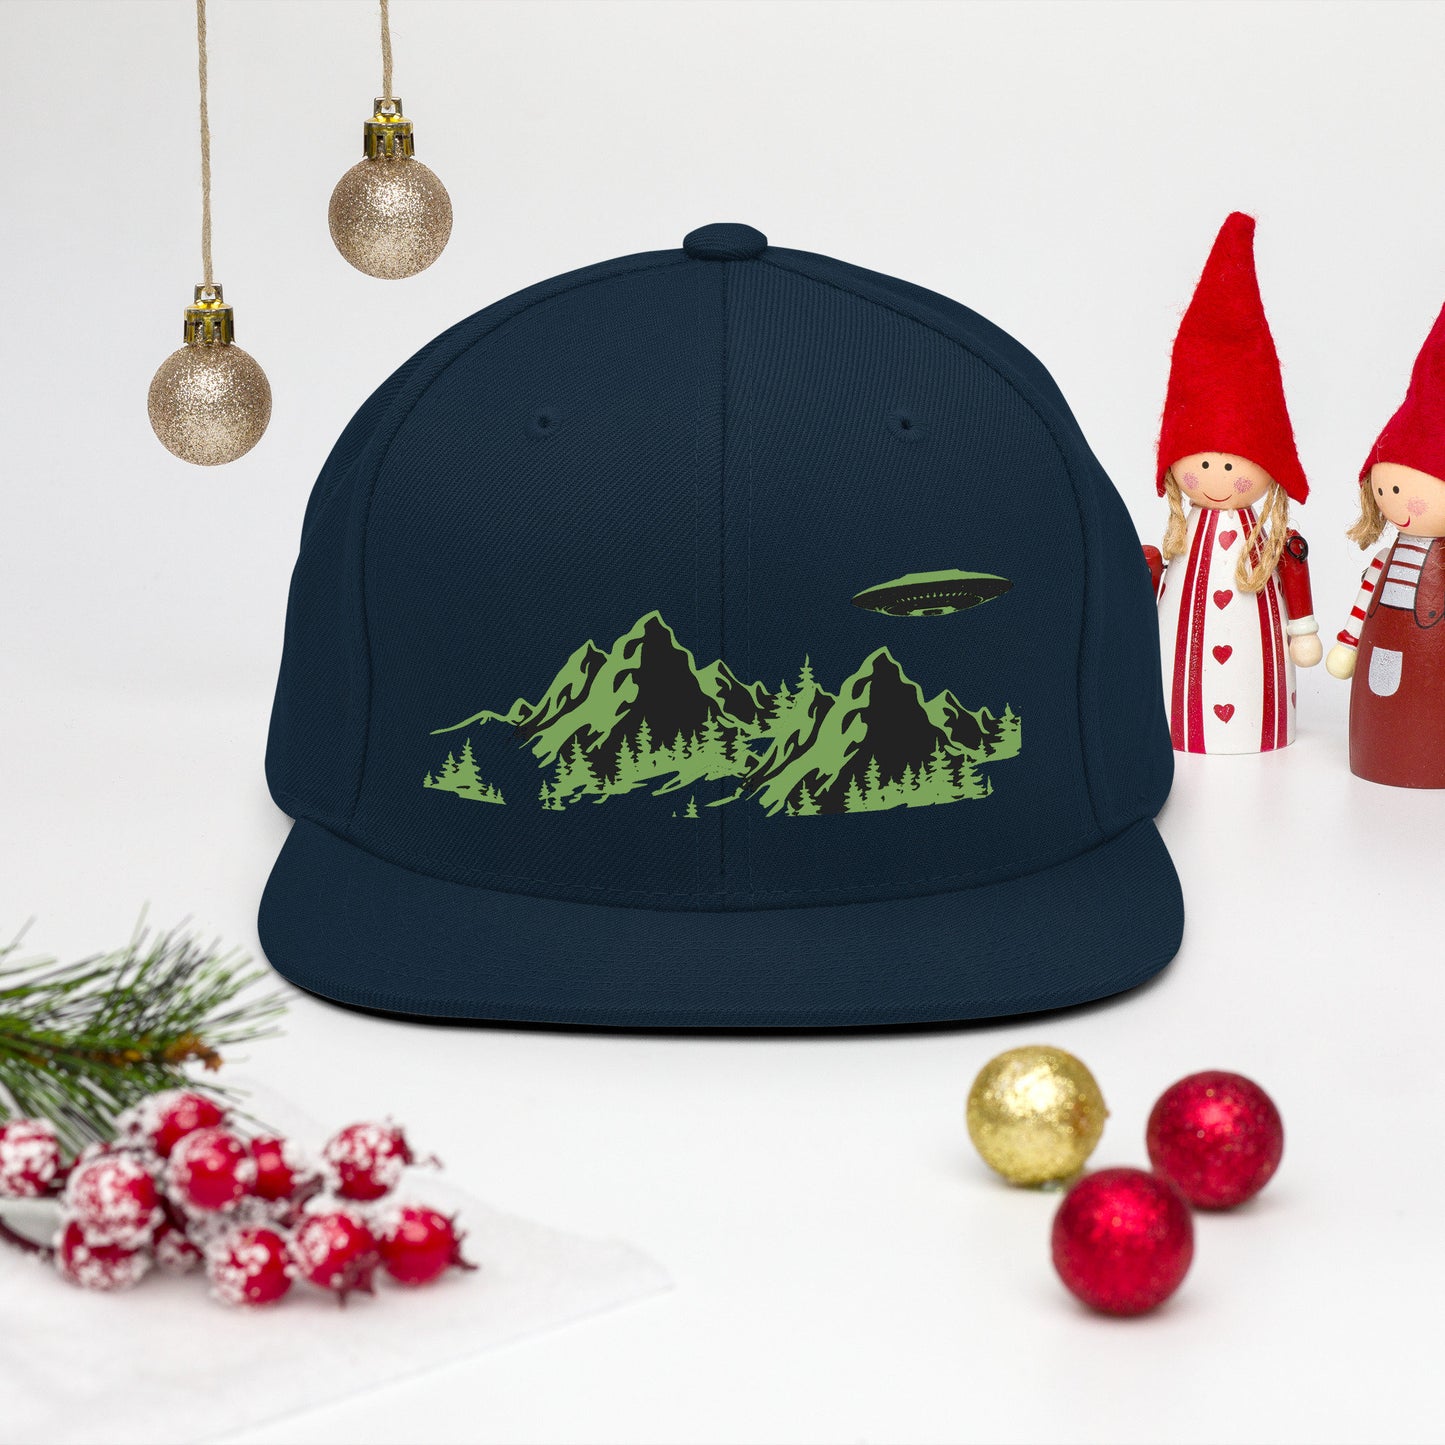 Hats - Black and Green UFO Mountains & Premium Snapback Hat